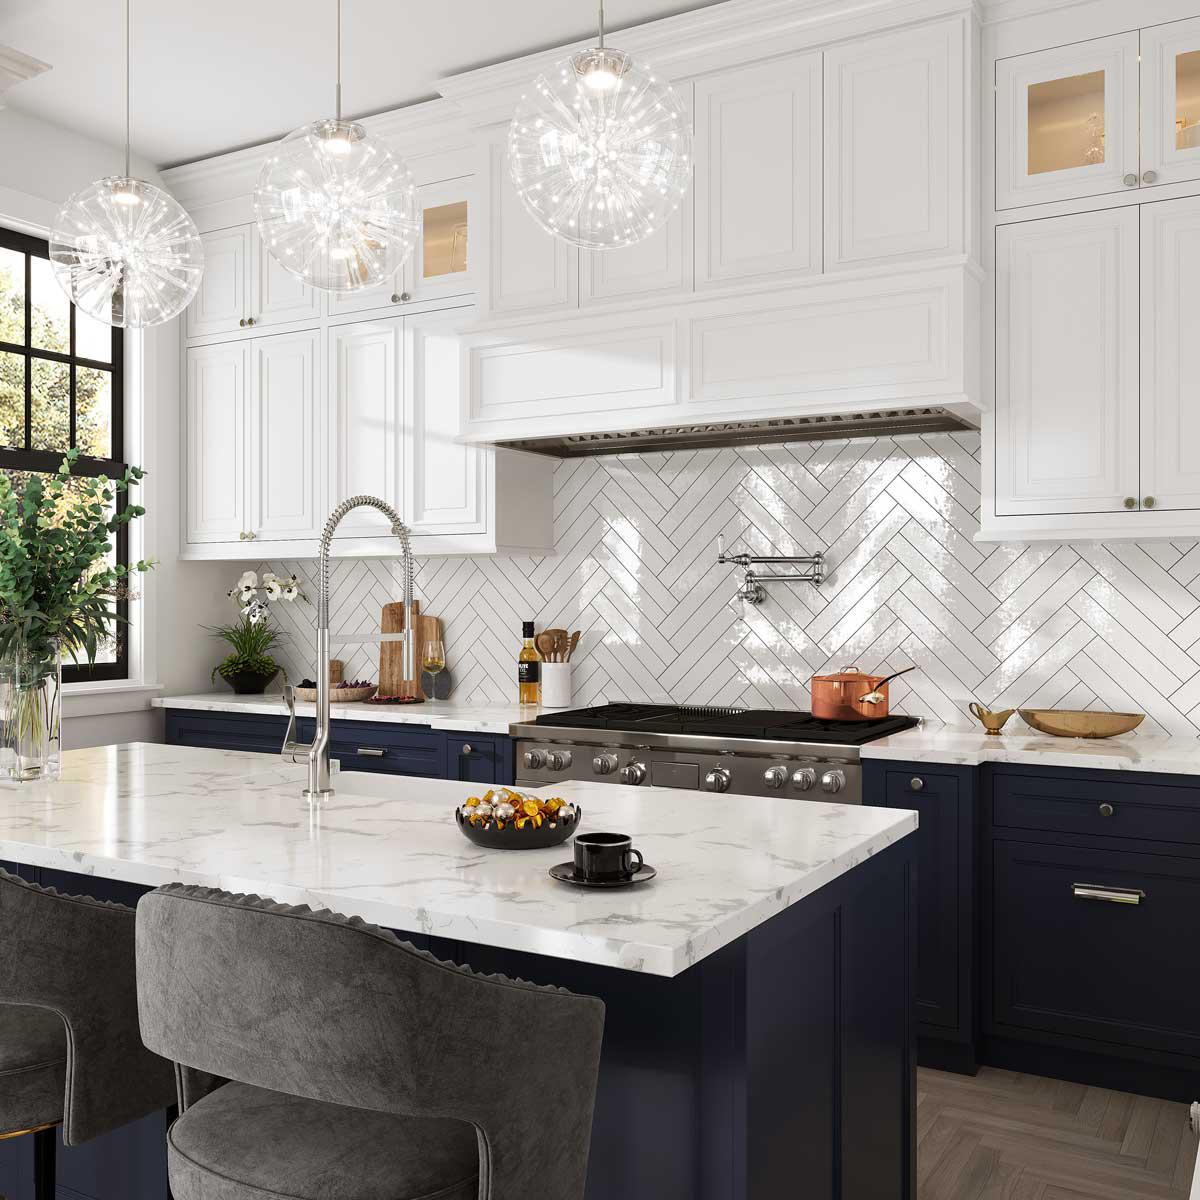 Navy blue cabinets and long white ceramic subway tiles